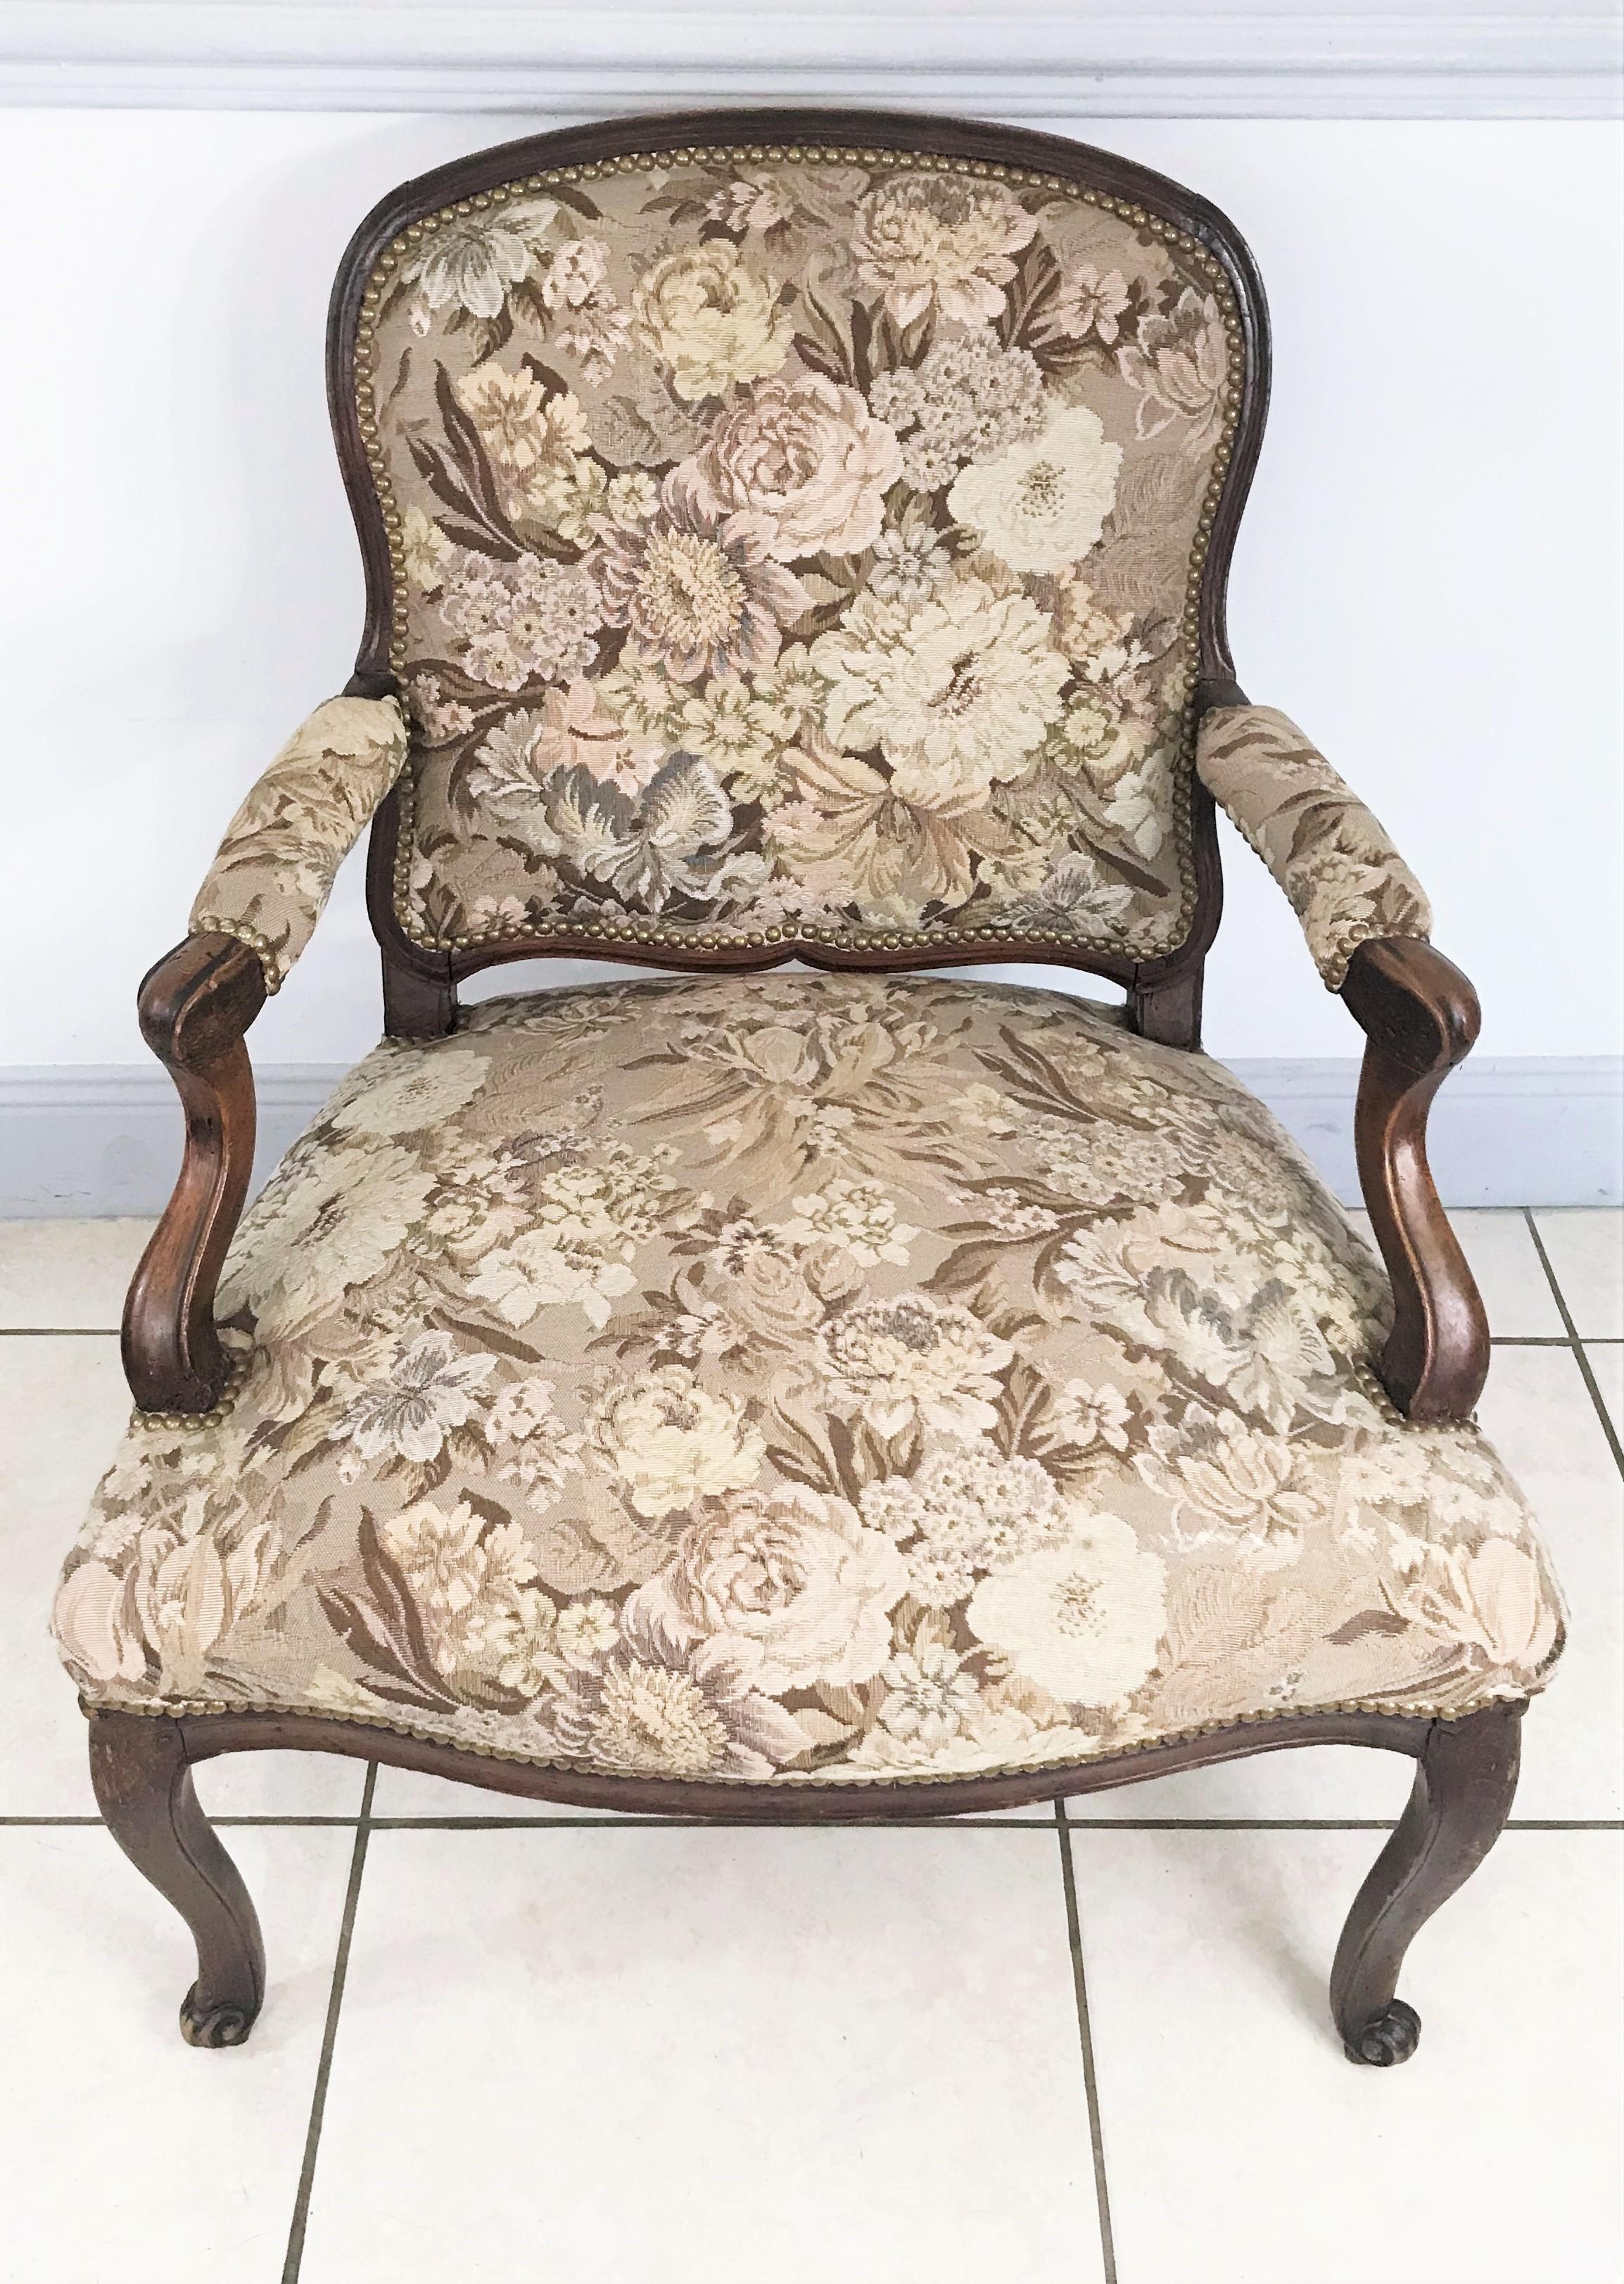 Beautiful Louis XV period armchair covered with a flower patterned tapestry. The armchairs have a sober and elegant movement of its accotoires as well as its arched feet.
France
circa 1750.